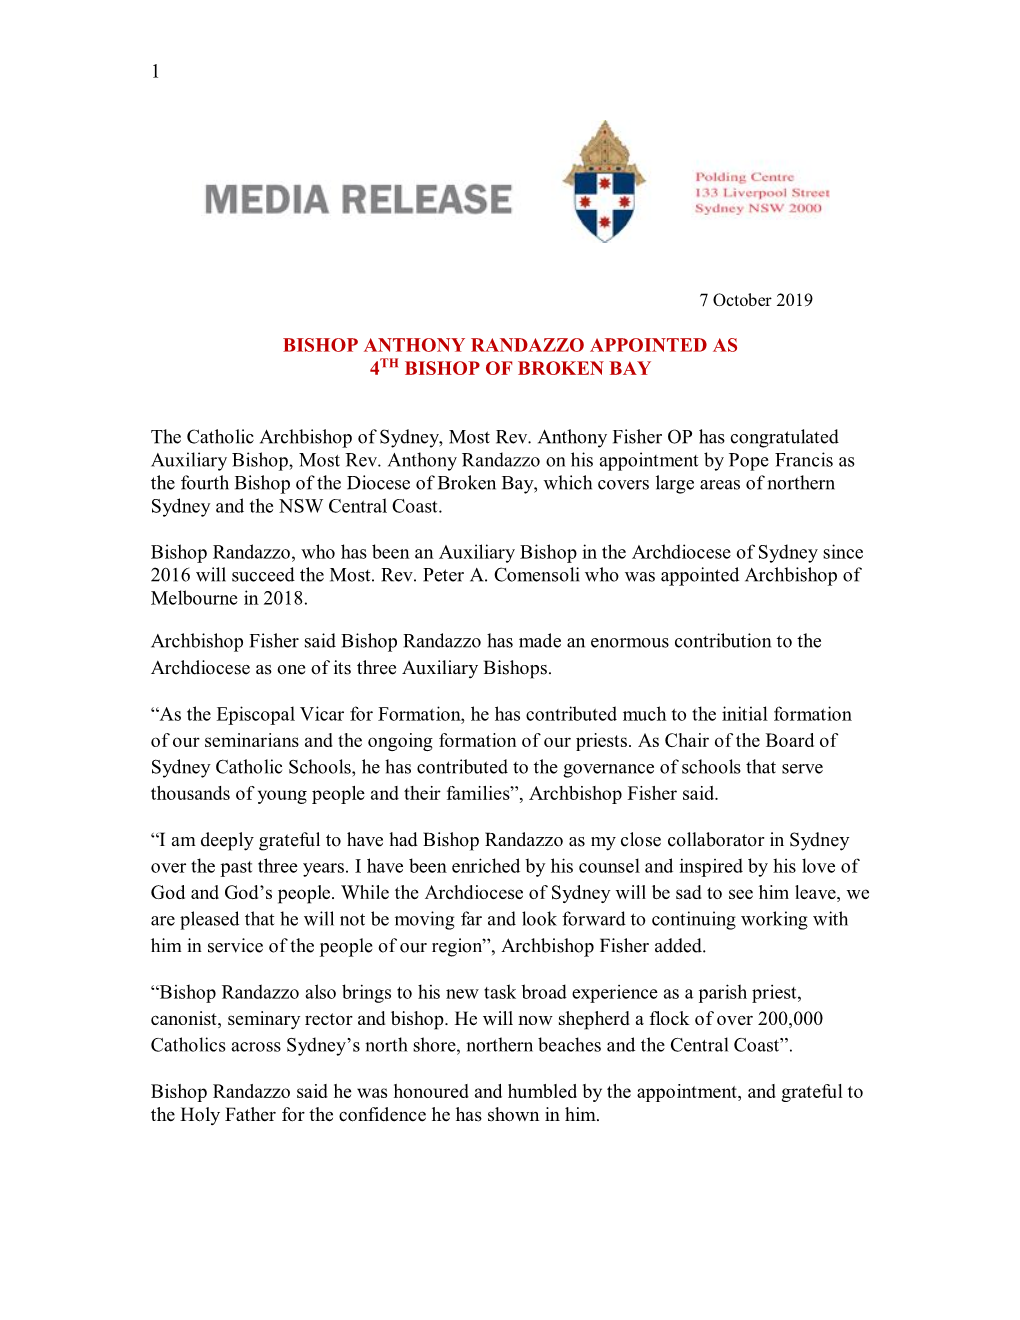 Bishop Anthony Randazzo Appointed As 4Th Bishop of Broken Bay